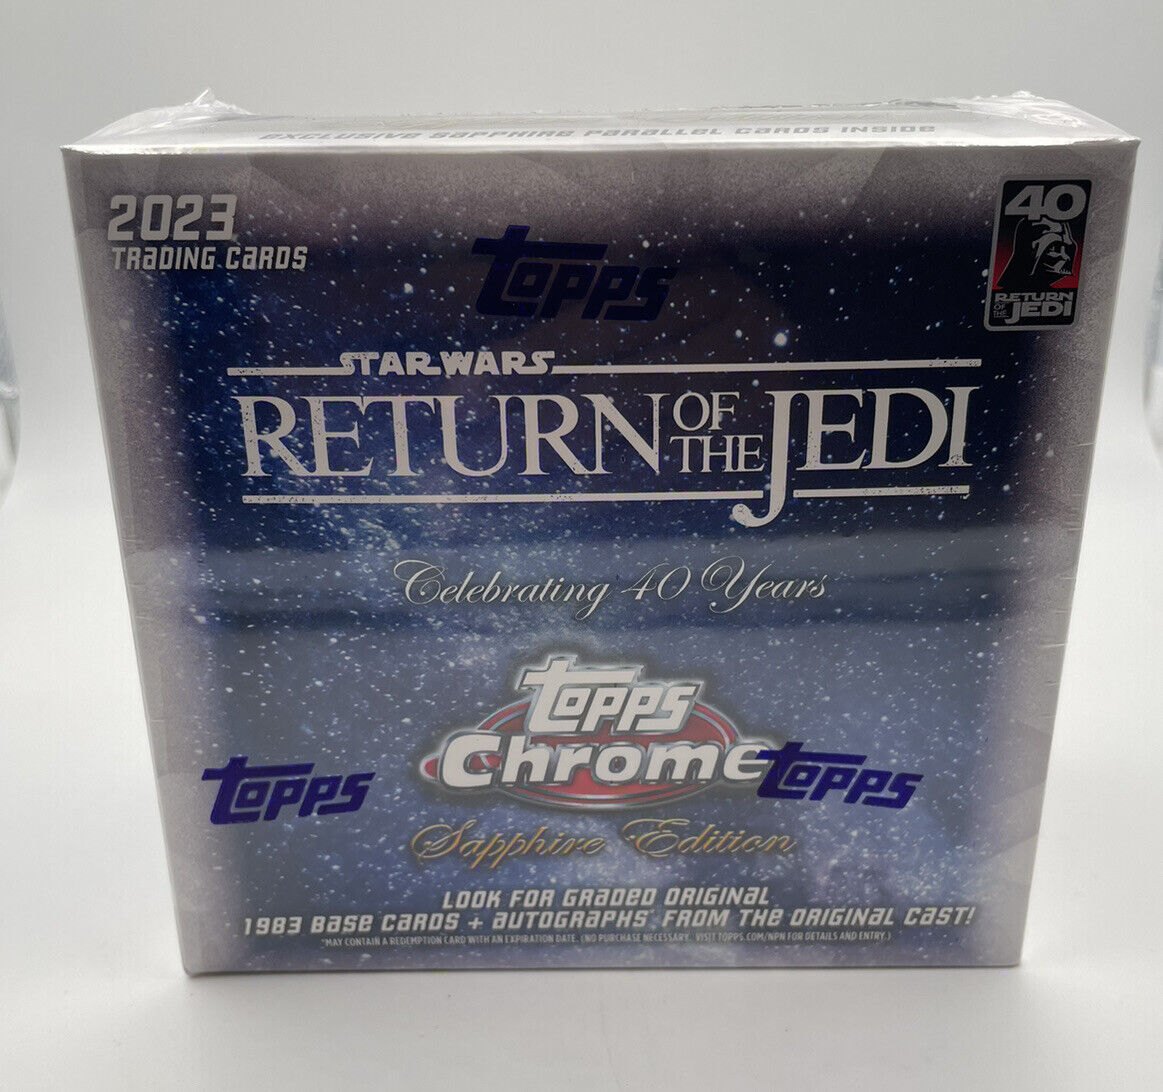 Star Wars Return Of The Jedi Topps Chrome Sapphire Edition 2023 Trading